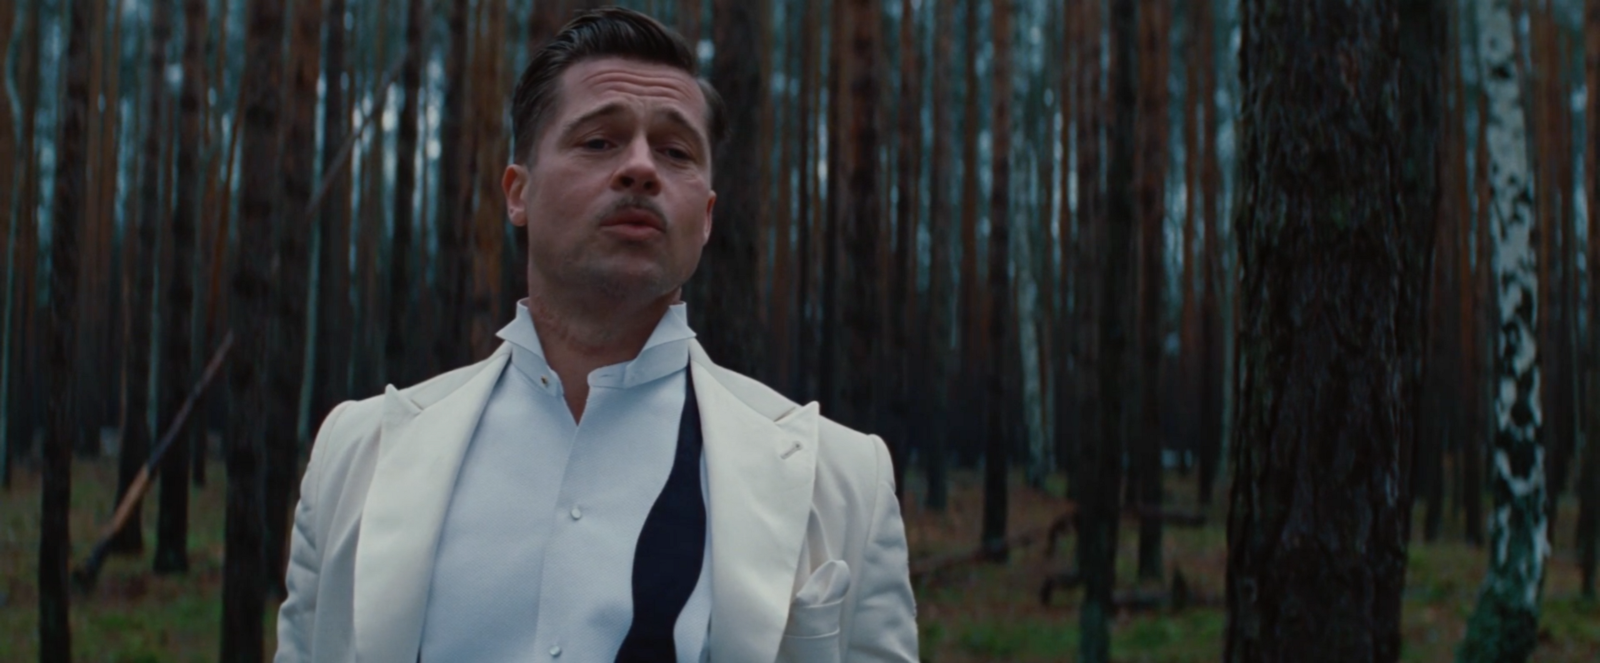 Revised — “I'm a slave to appearances”: A Closer Look at Lt. Aldo Raine in Inglourious  Basterds | by Phillip Nguyen | Medium